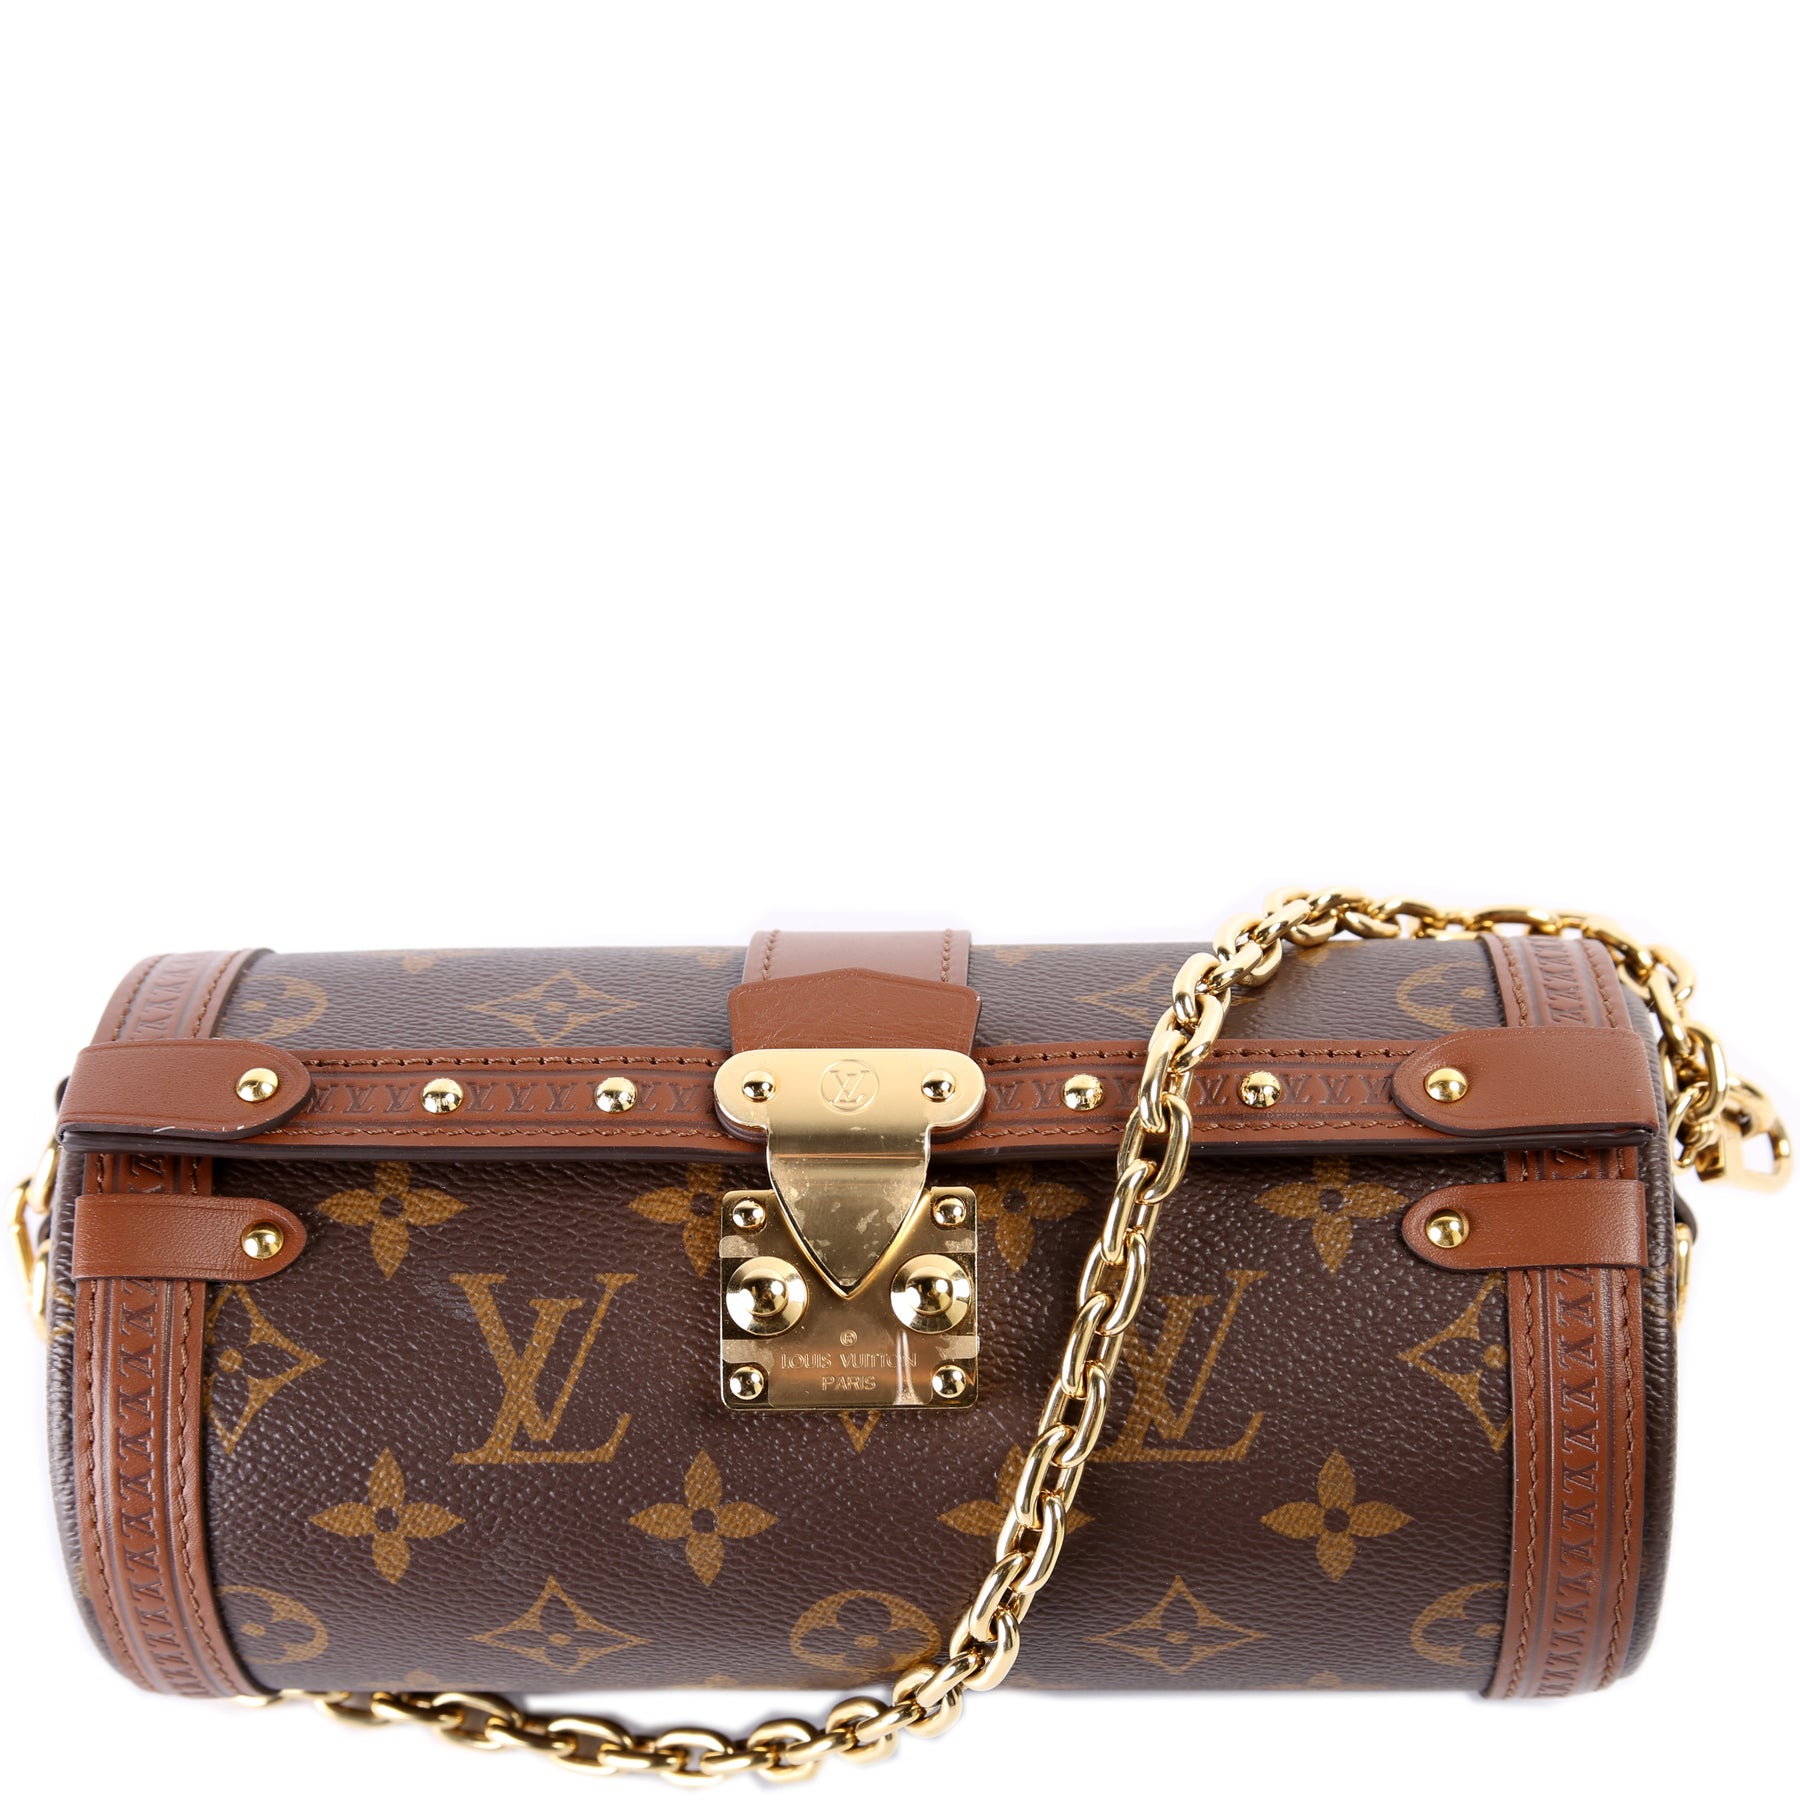 Papillon trunk leather handbag Louis Vuitton Brown in Leather